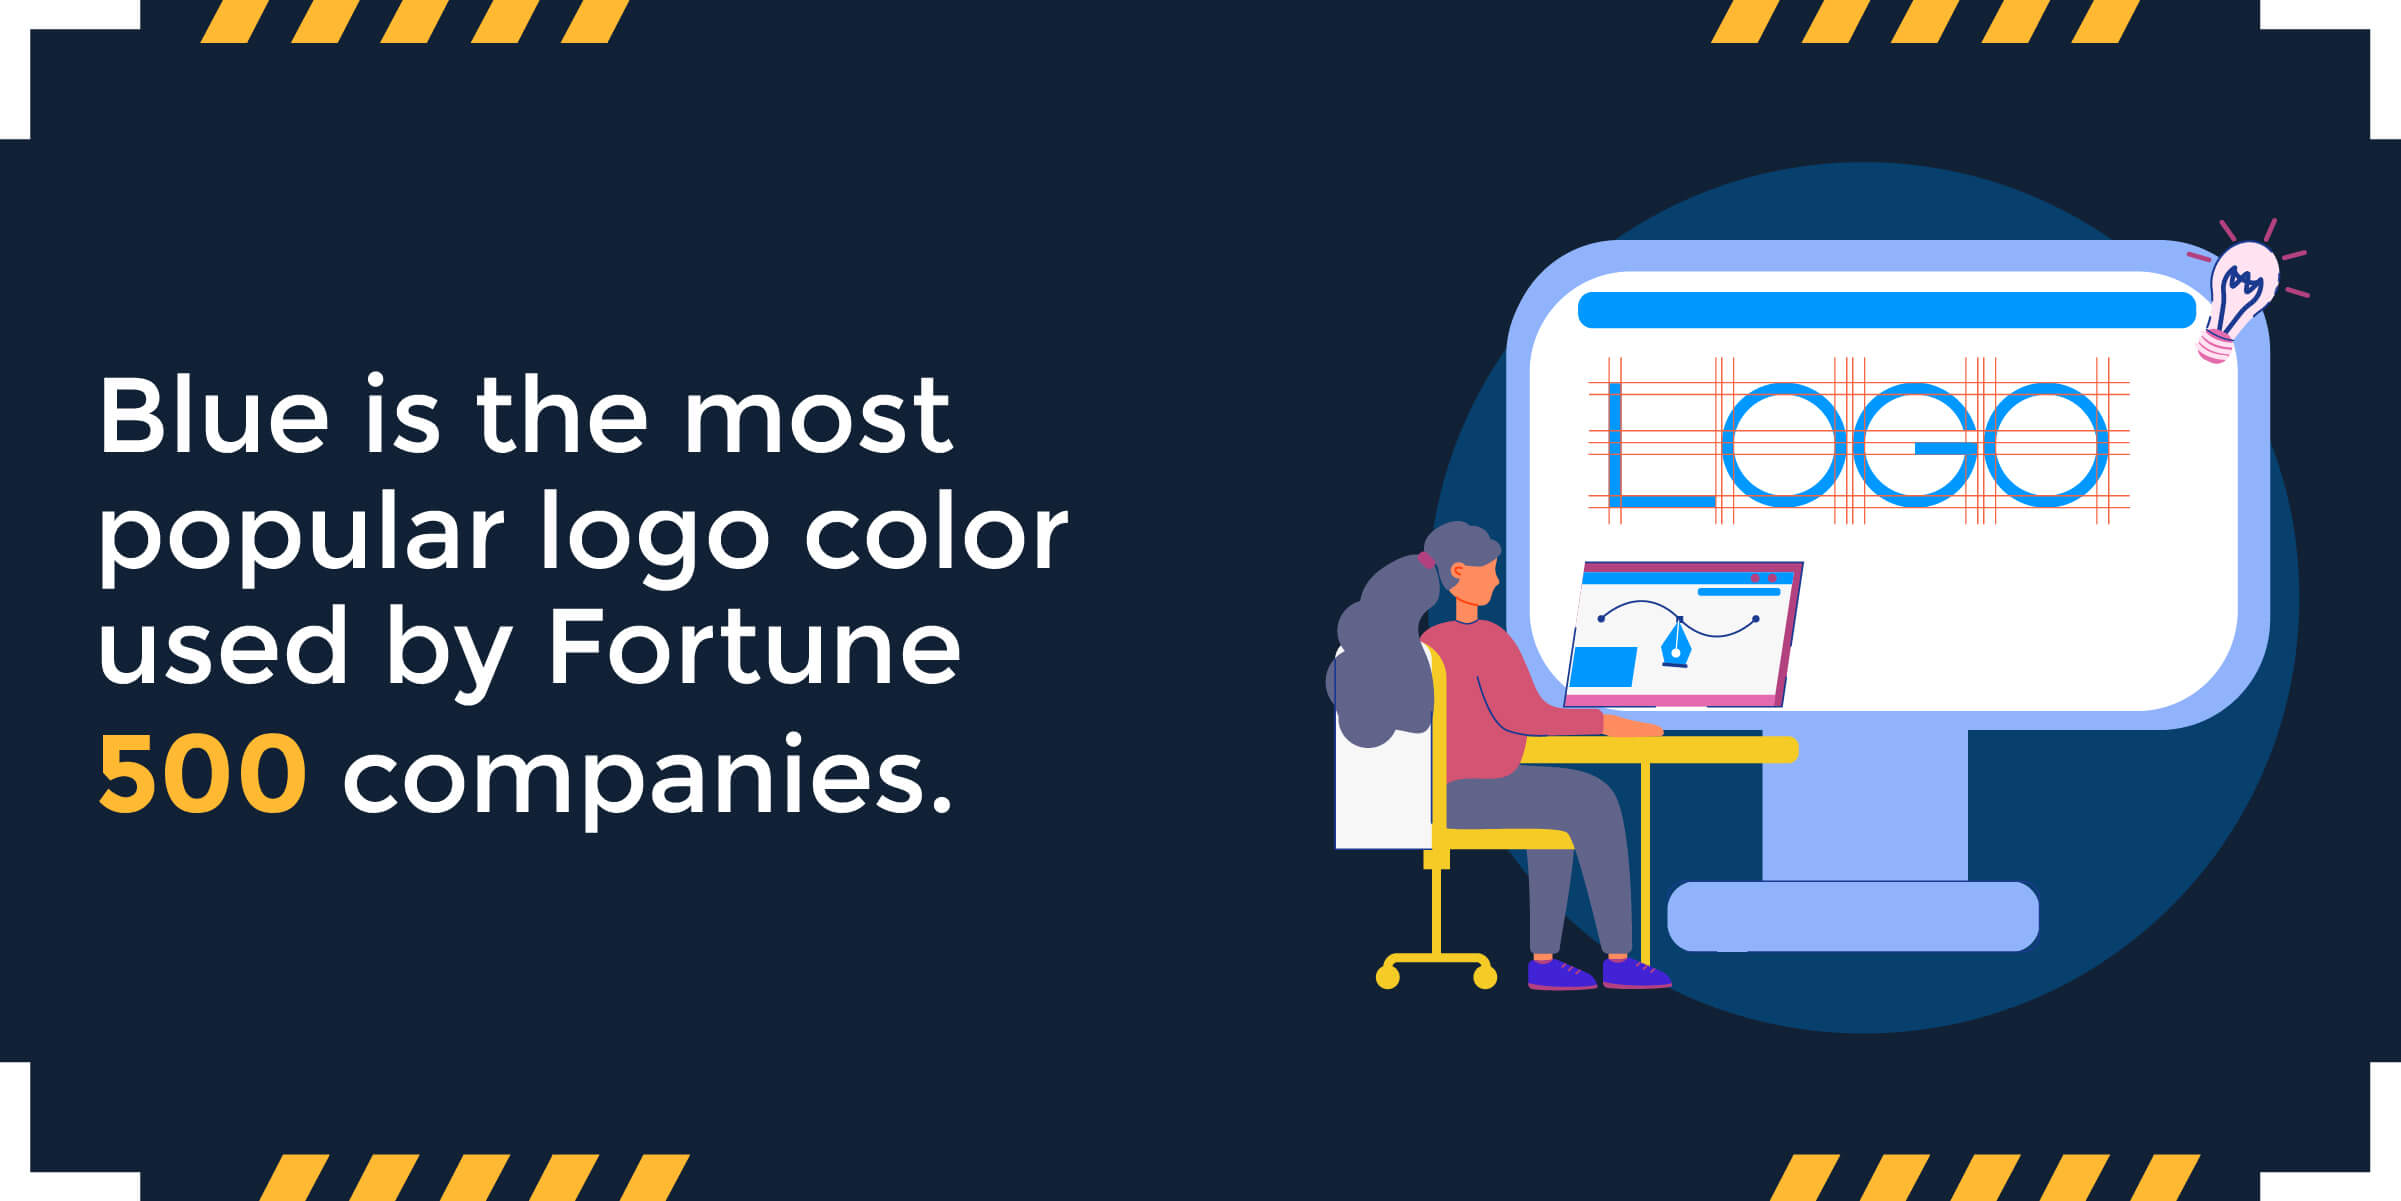 blue is the most popular logo color